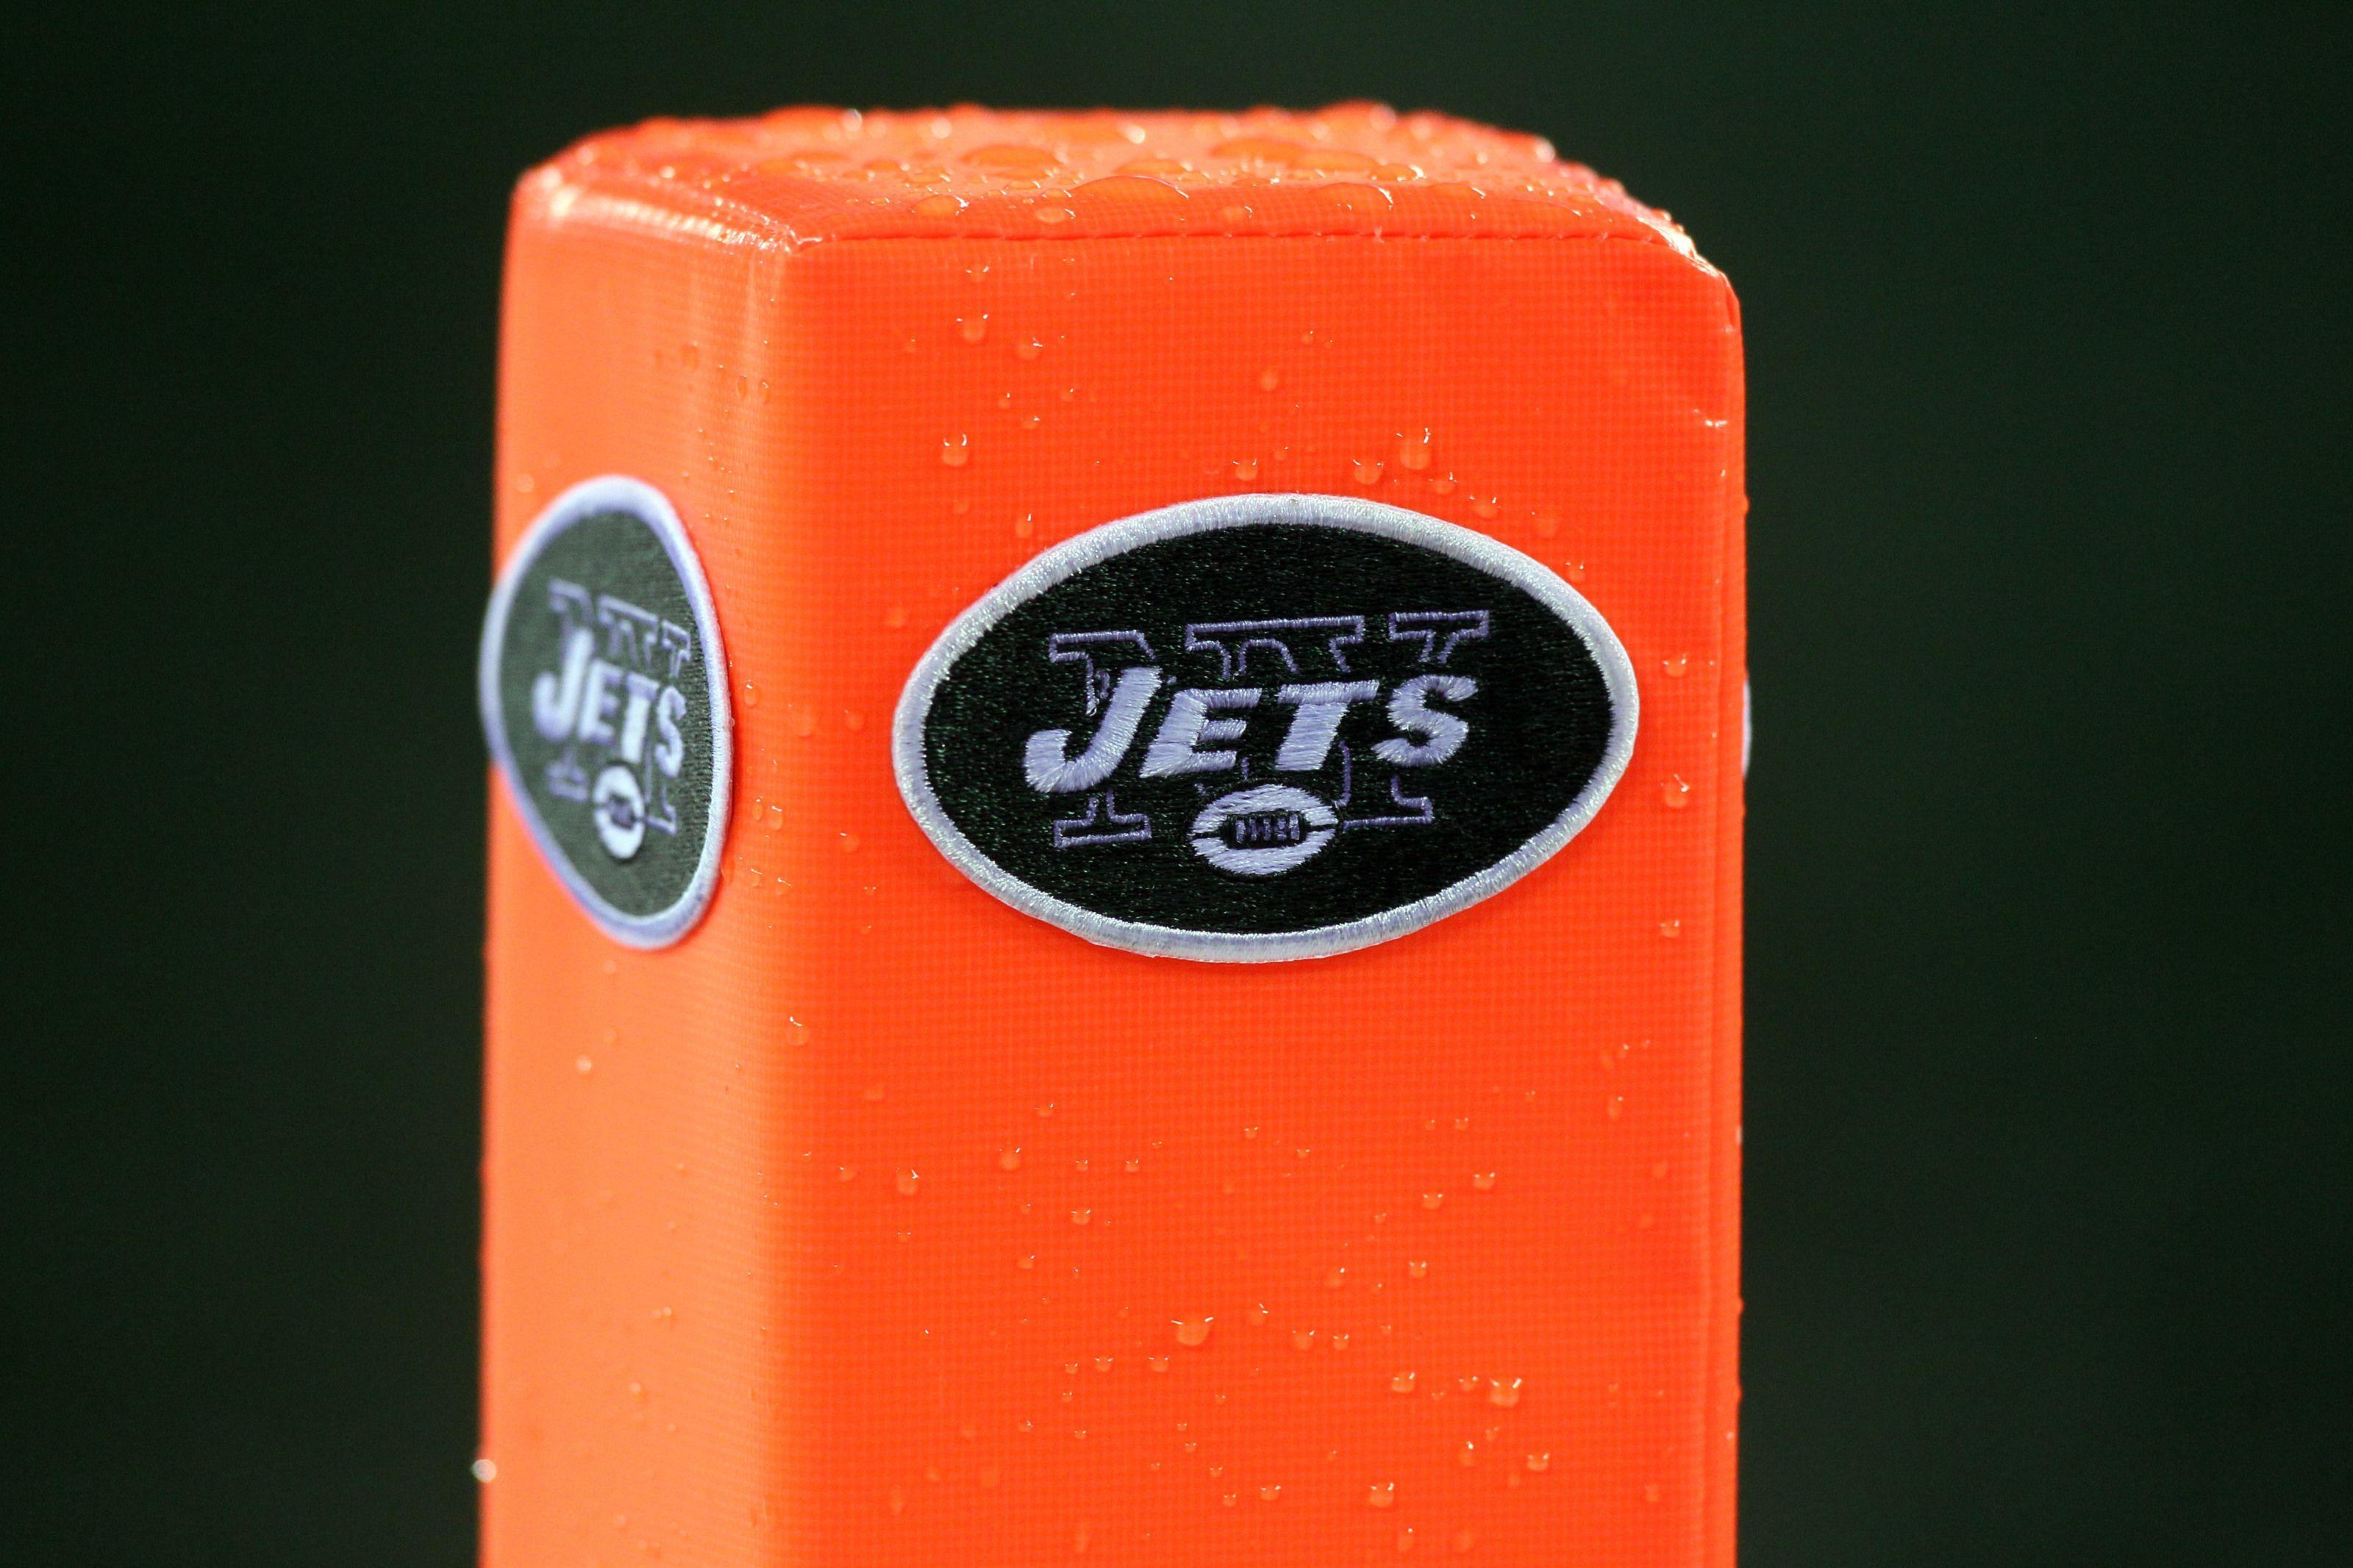 Best NY Jets Logo - New York Jets: Graphic designer believes team logo is too busy